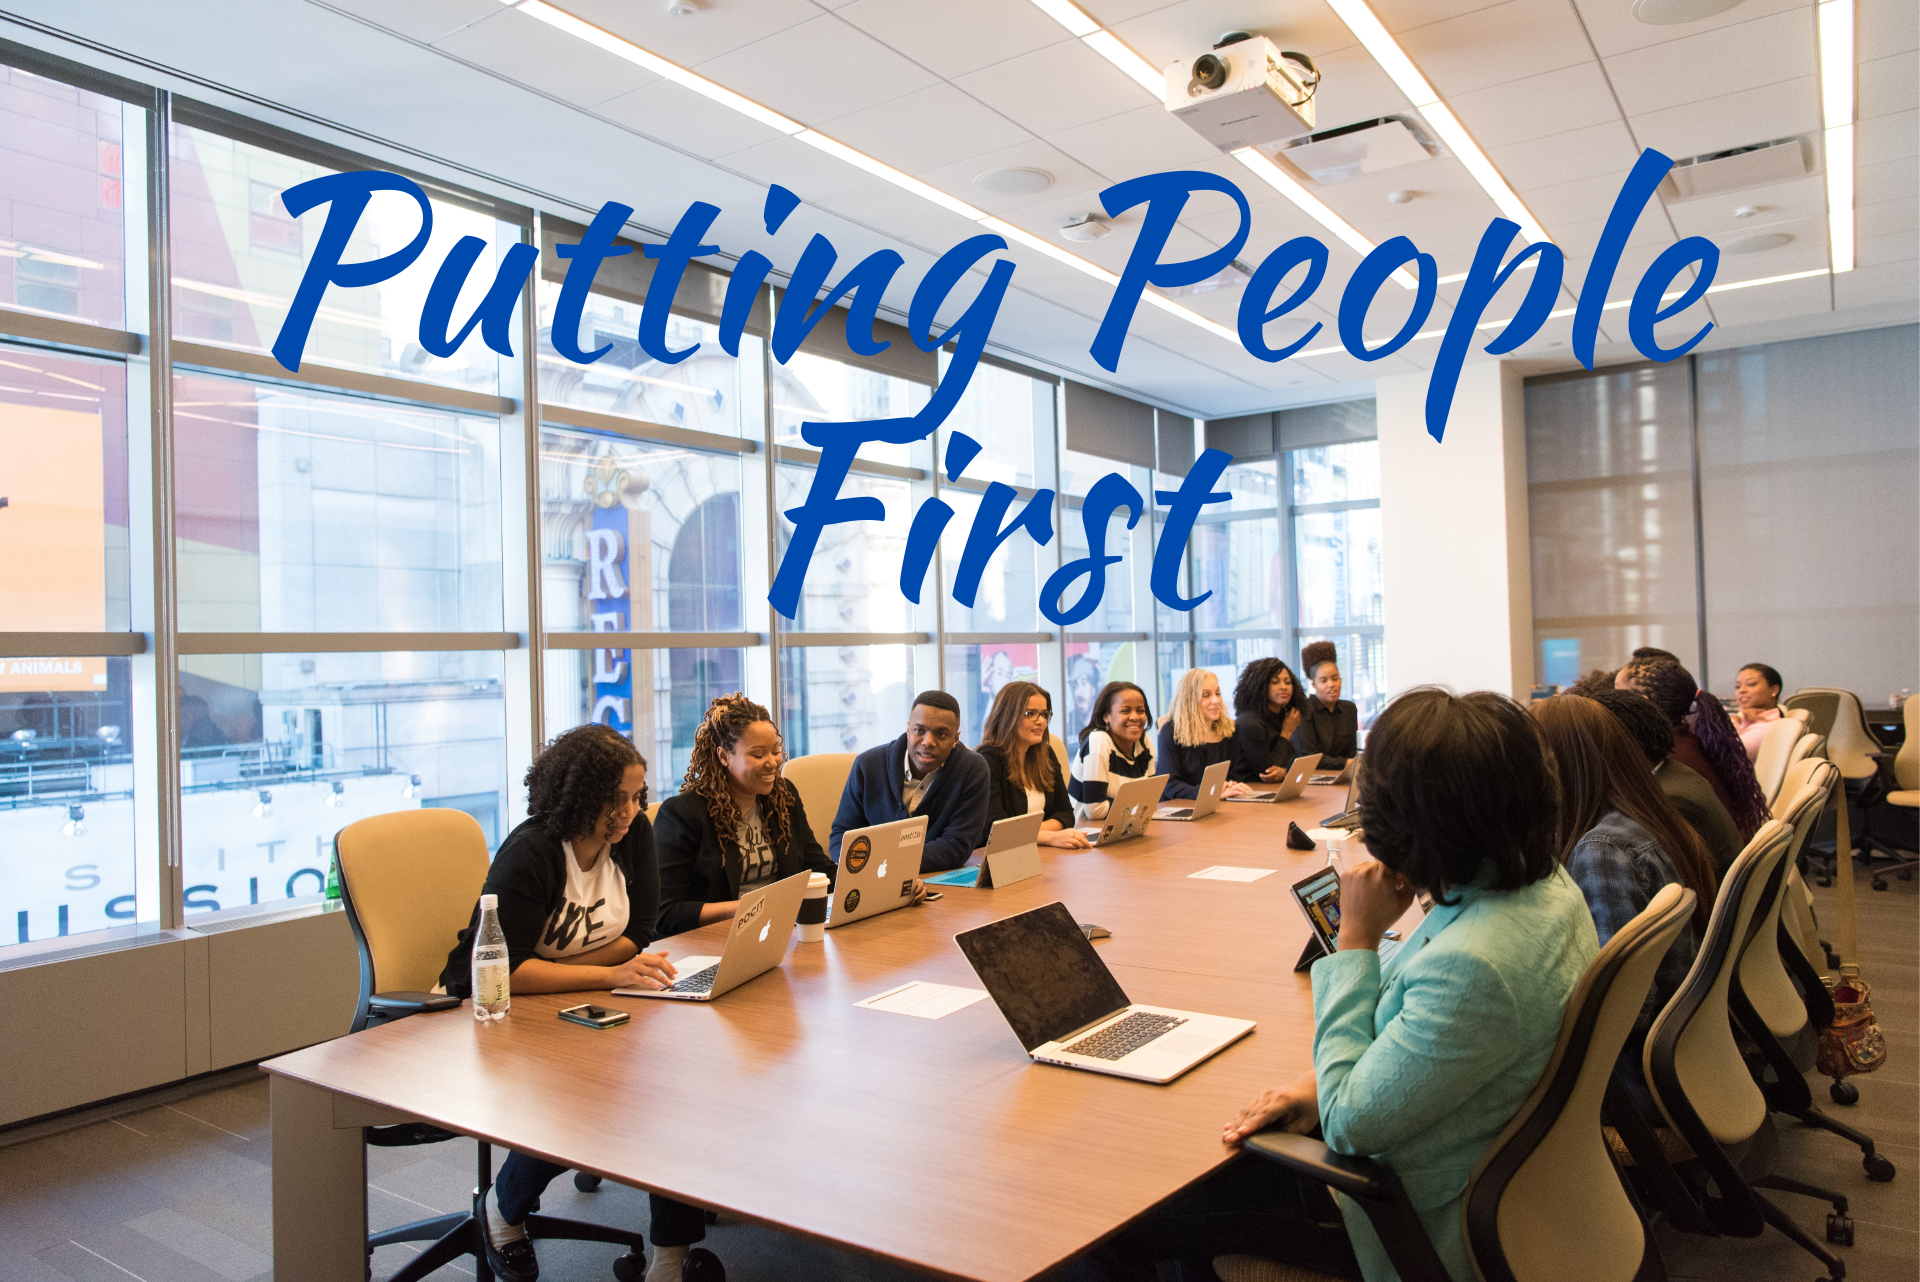 Putting People First